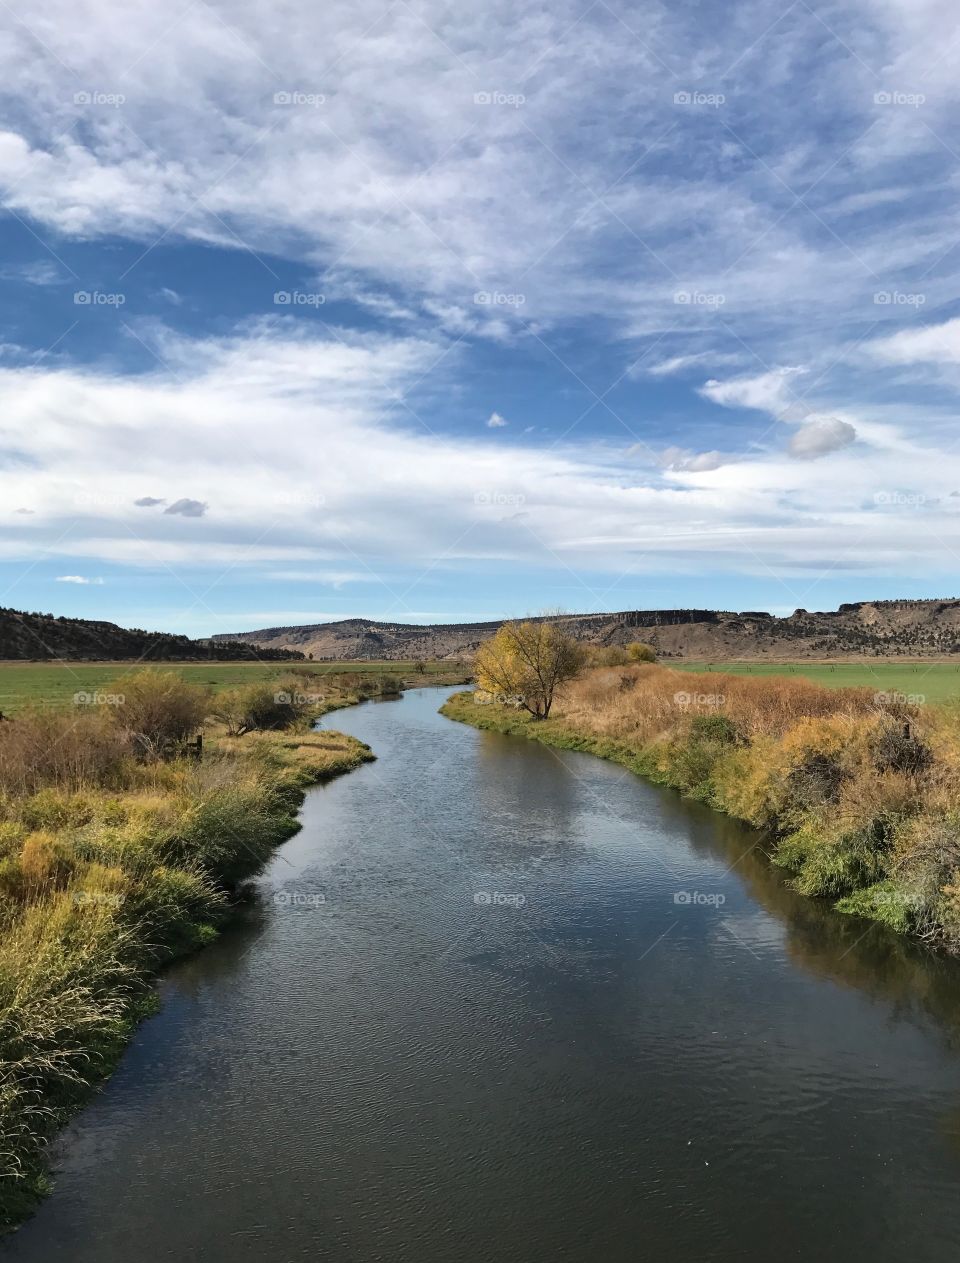 The Crooked River in Central Oregon flows along its banks covered in foliage that had changed to fall color underneath a deep blue sky accented with clouds.